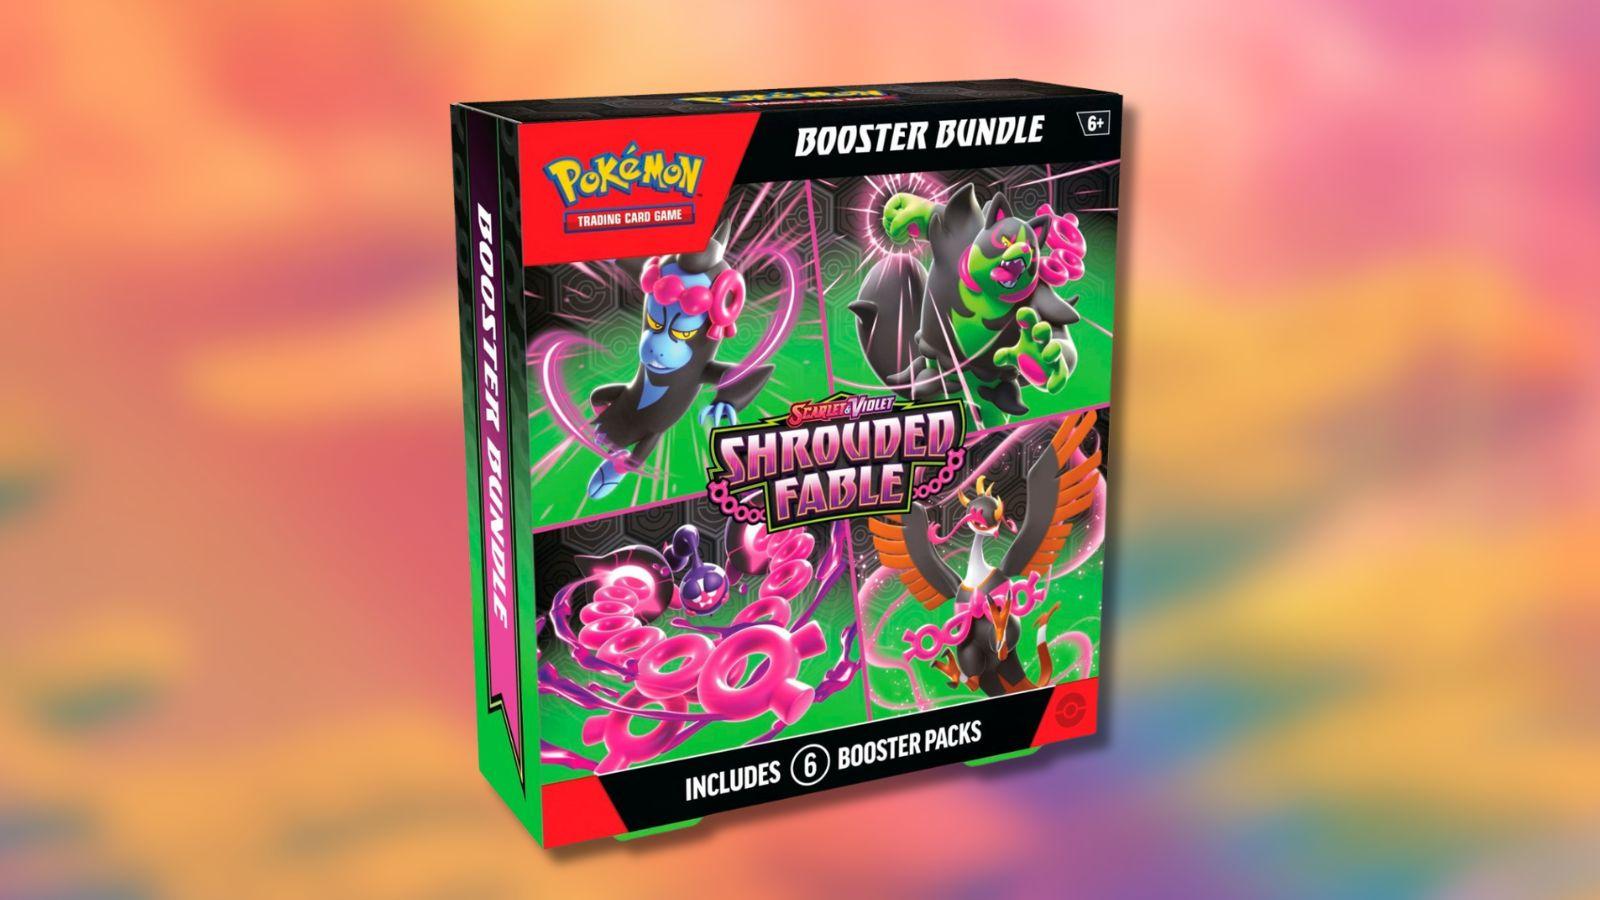 Shrouded Fable Booster Bundle with abstract Pokemon background.